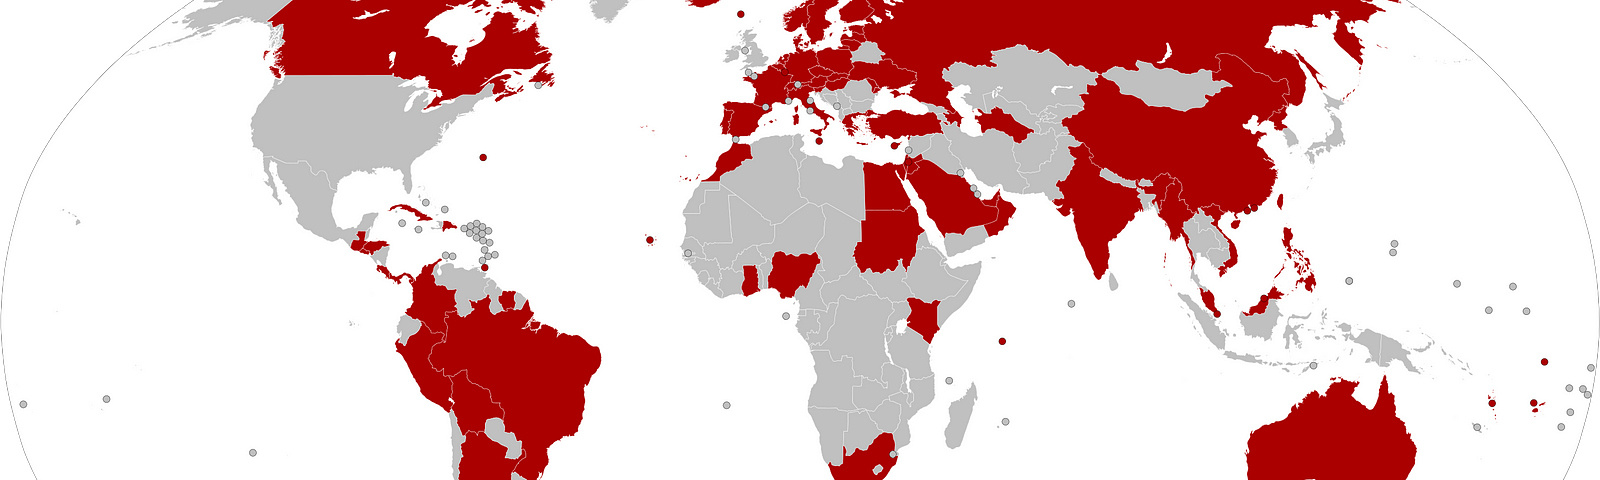 Map of the world showing the countries that had implemented a global travel ban in response to the COVID-19 pandemic, as of March 29, 2020.